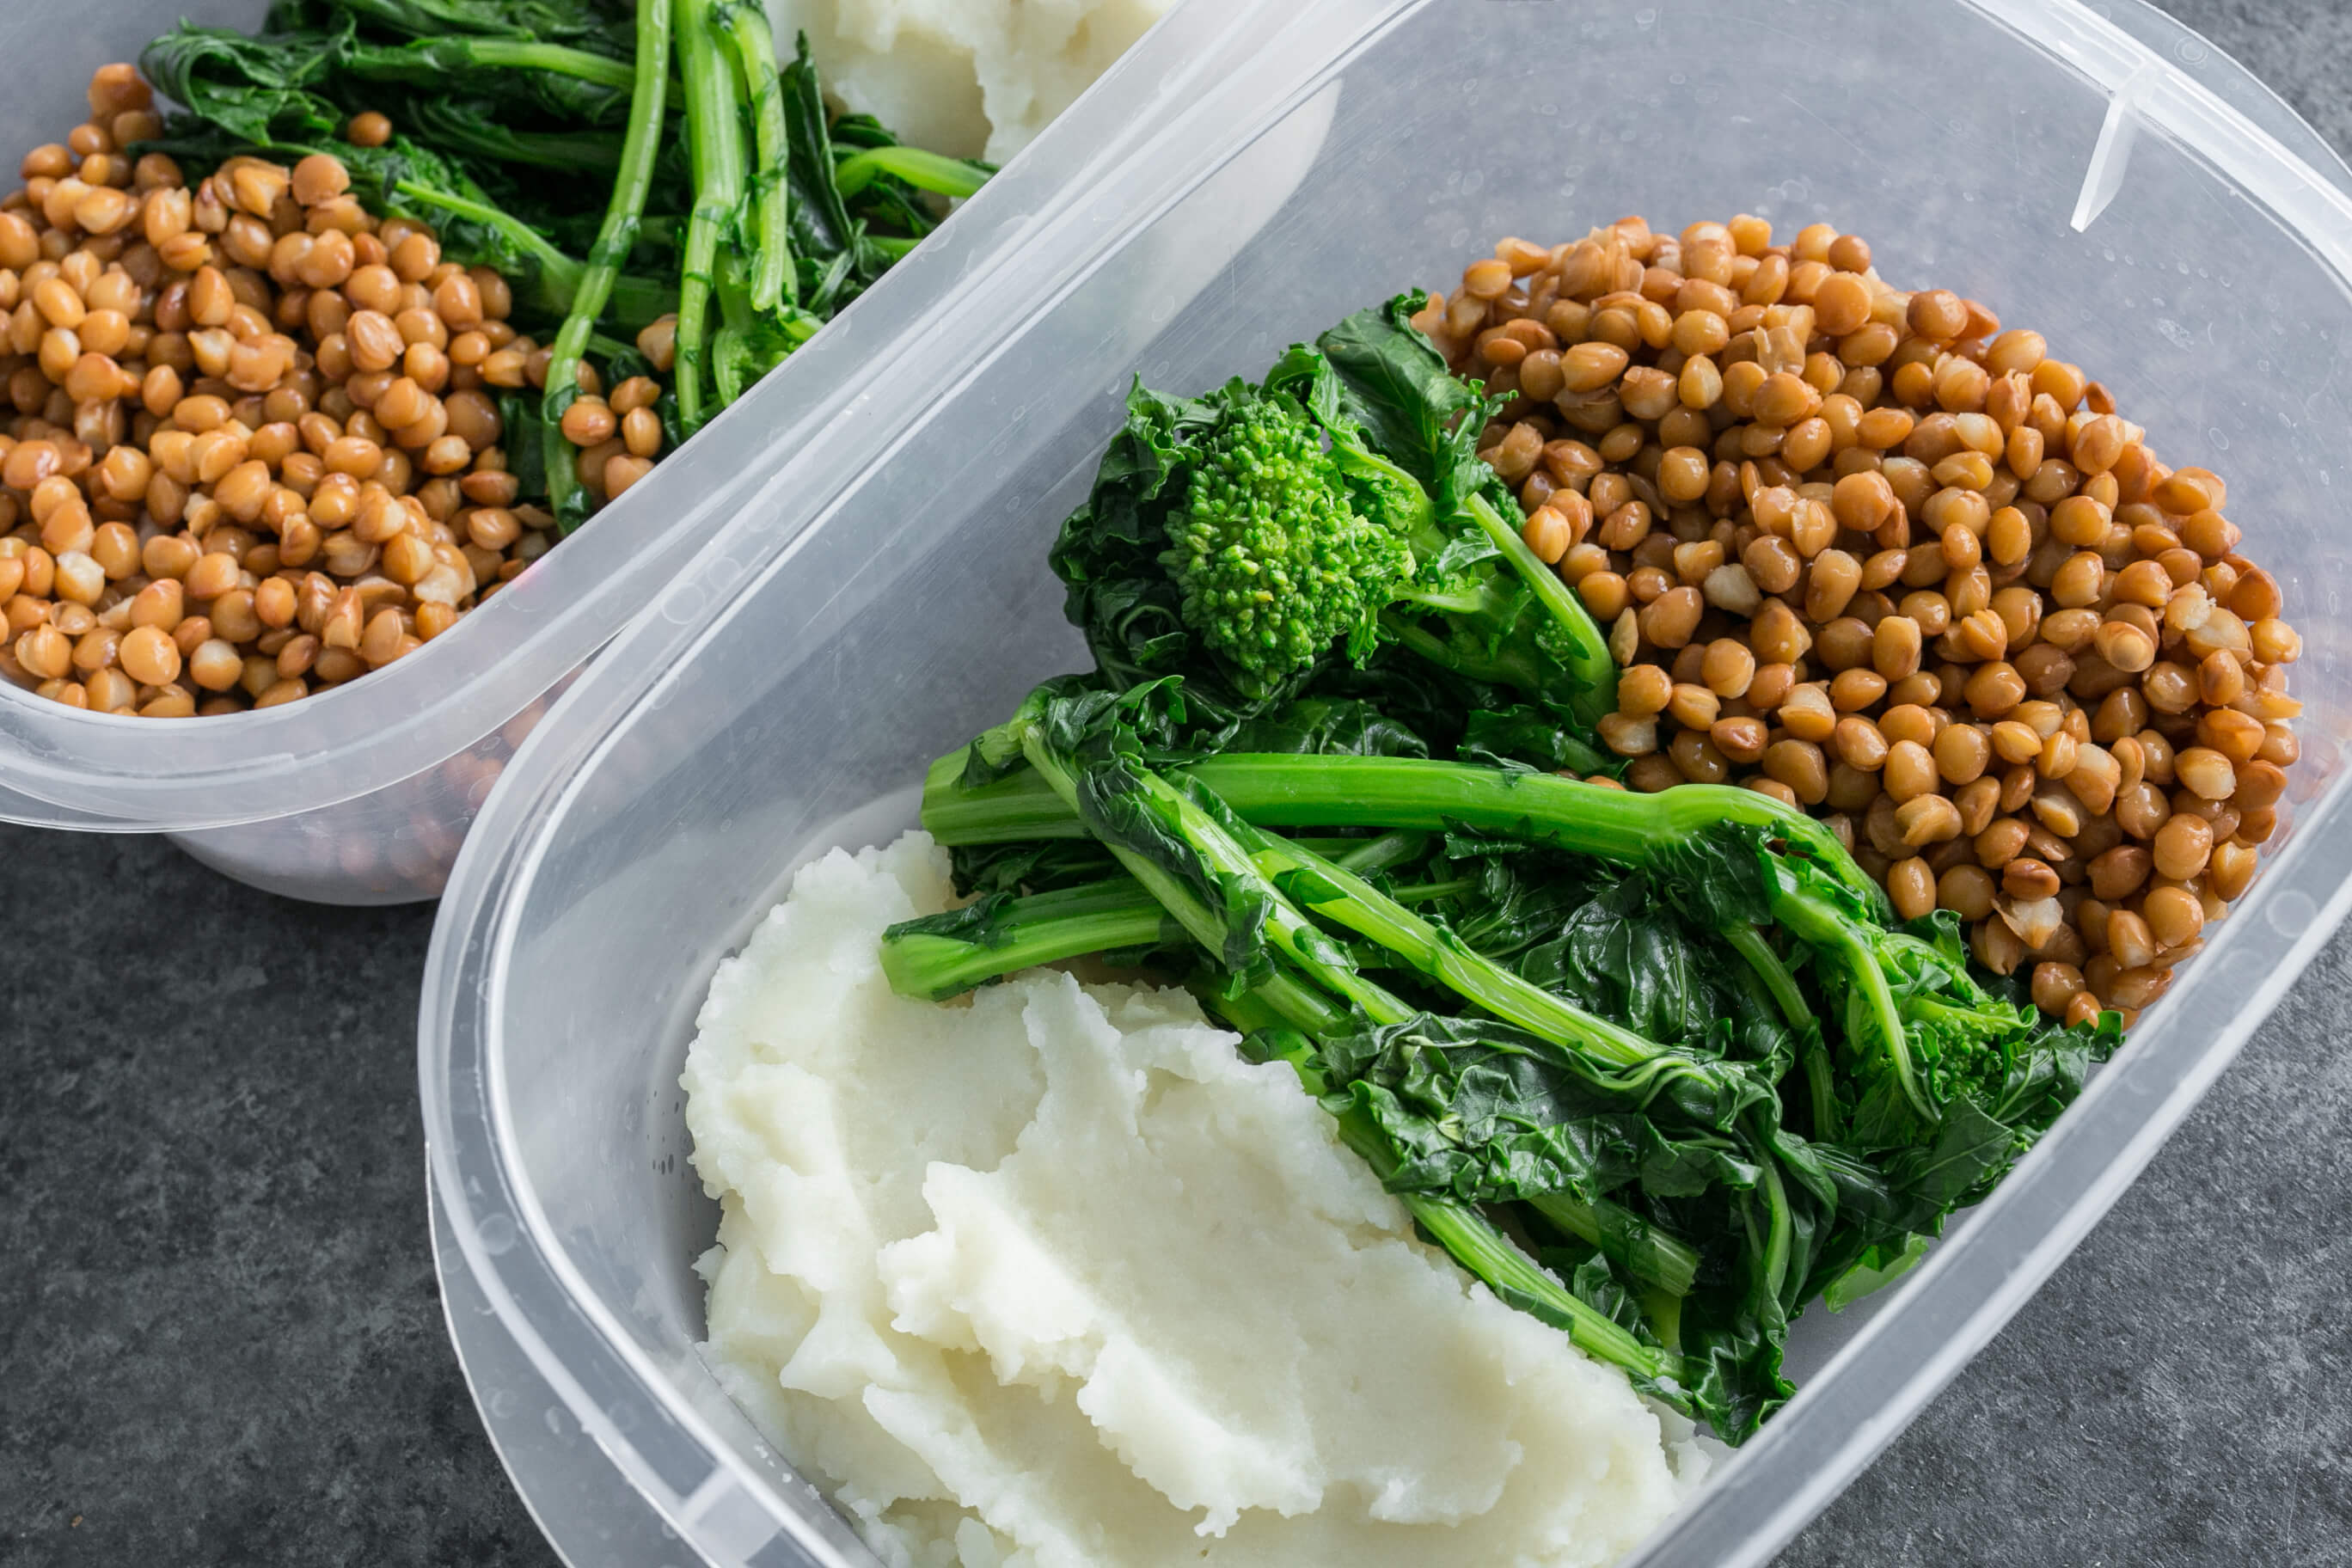 Healthy $4 Dinners to Add to Your Client's Meal Plan: Lentils, Rapini & Mashed Potatoes